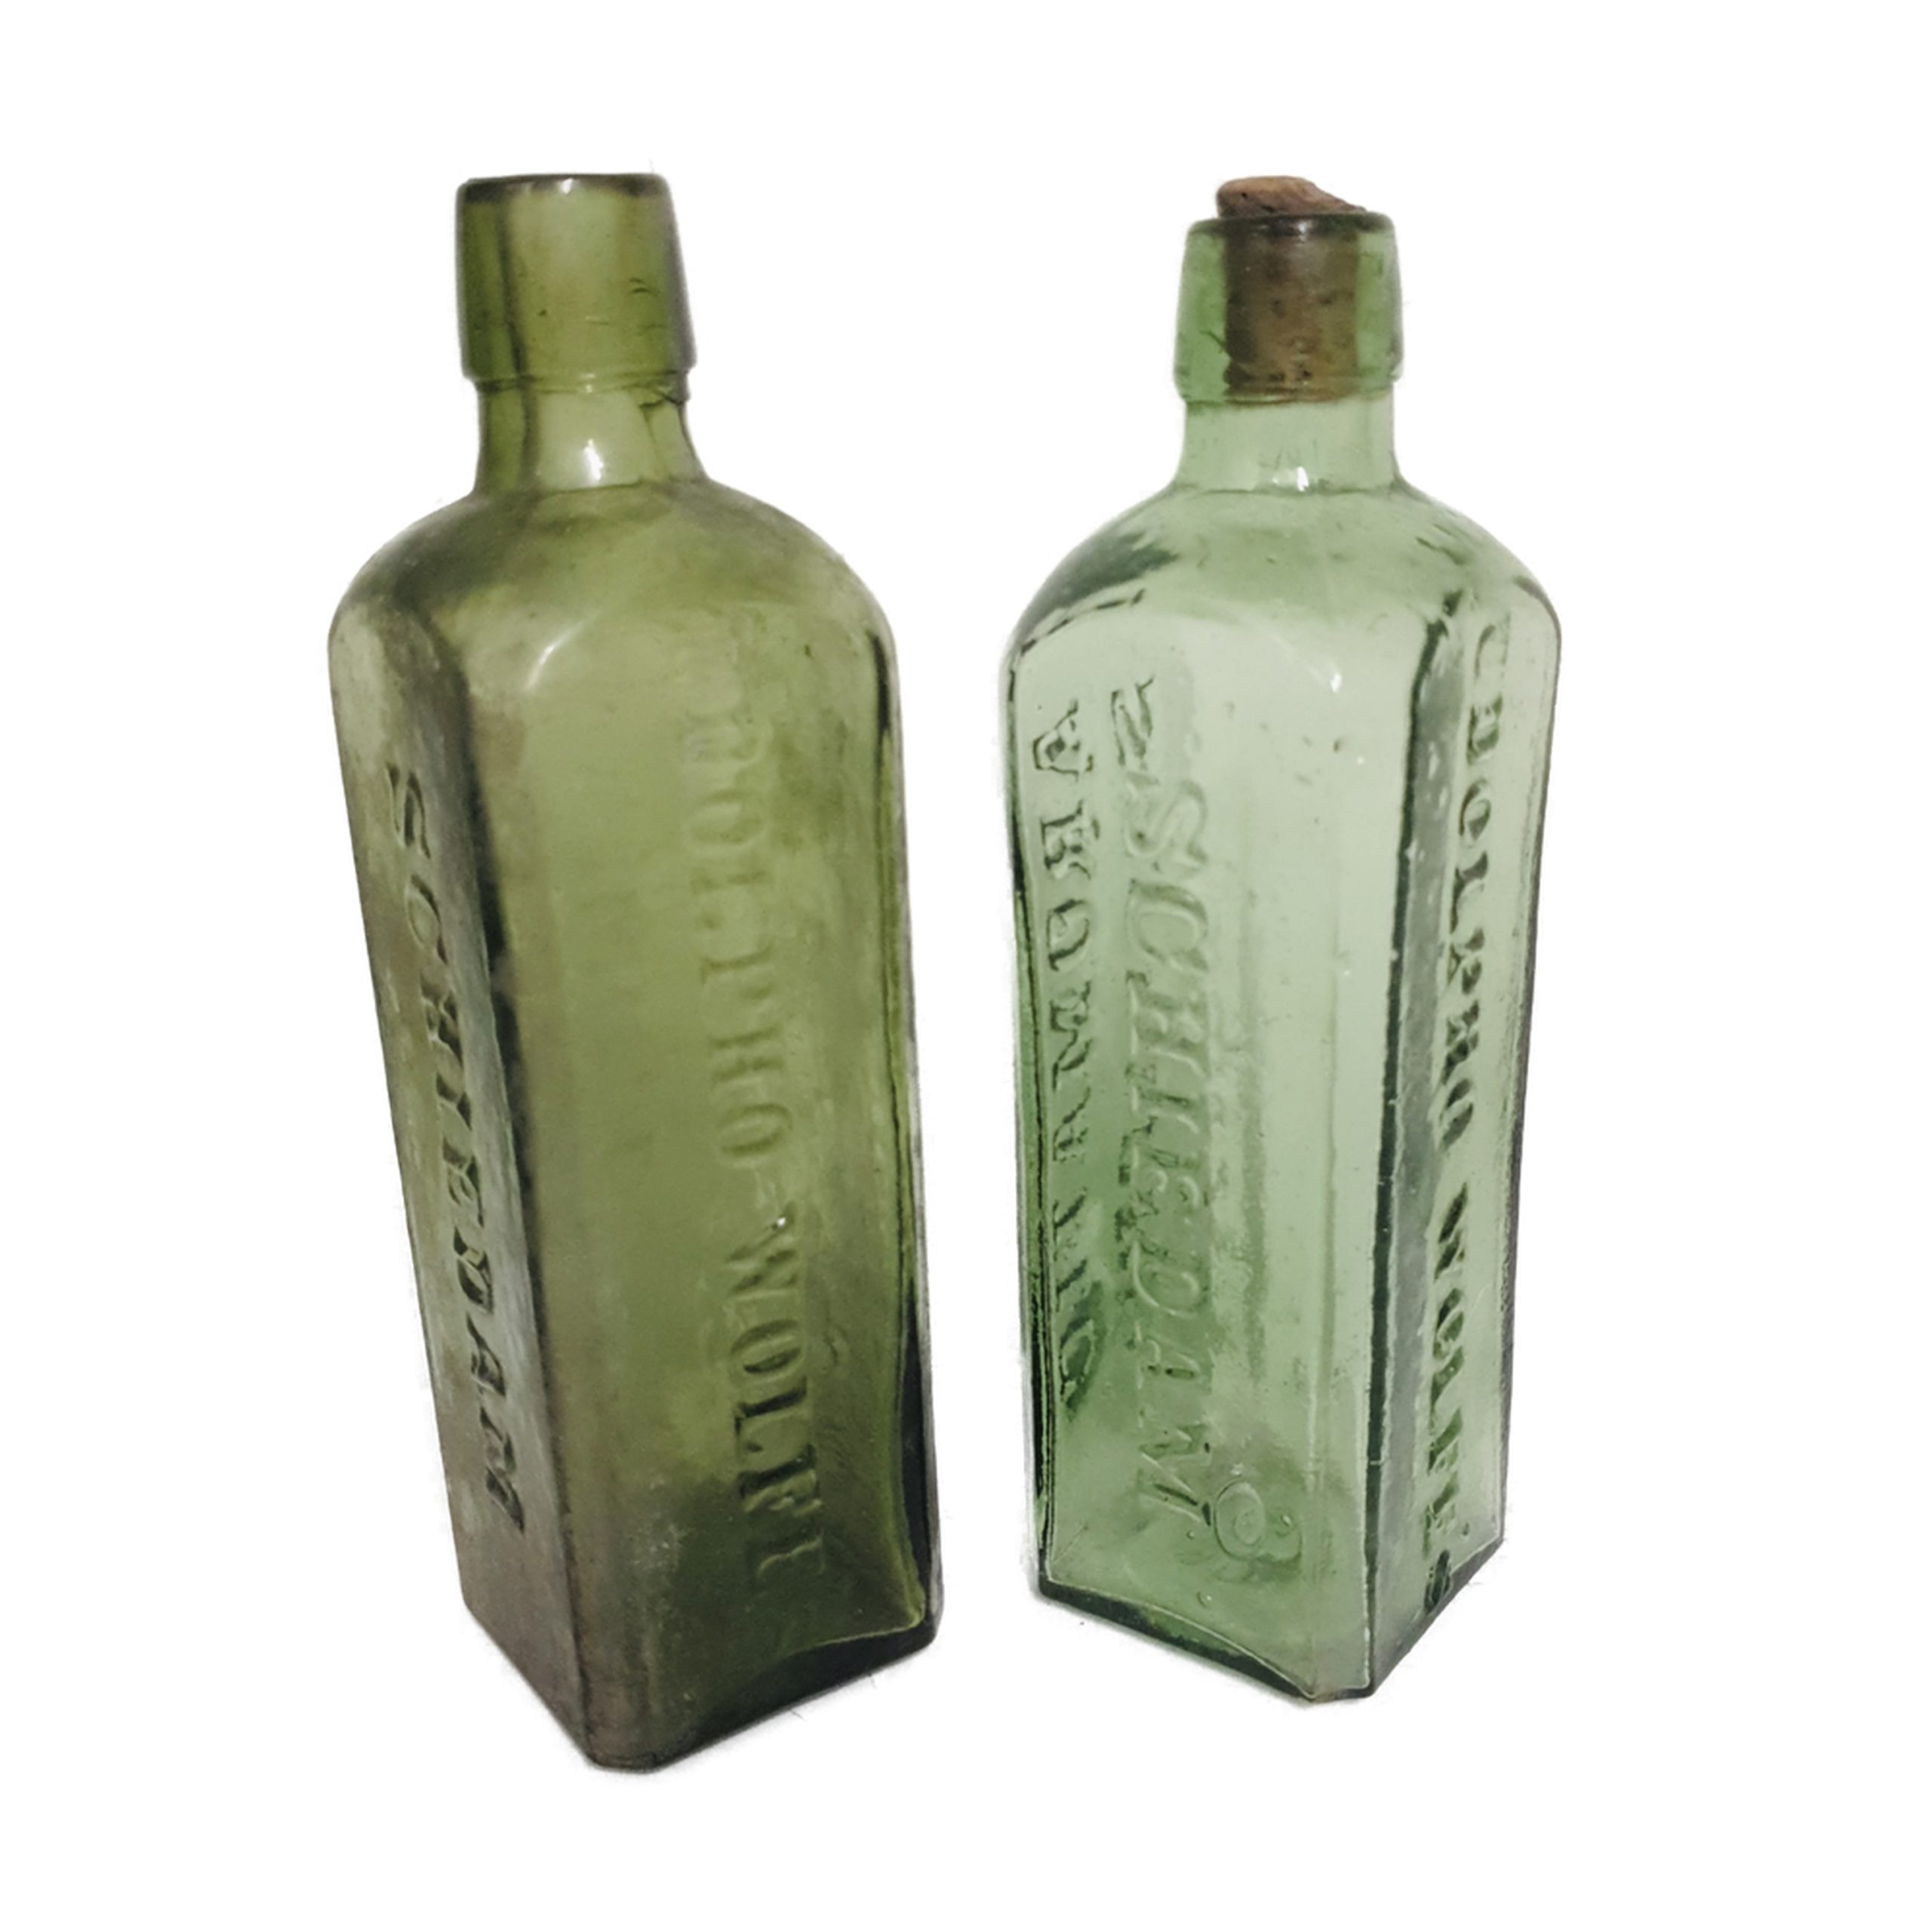 Vintage UDOLPHO WOLFE'S' aromatic schnapps bottle x2